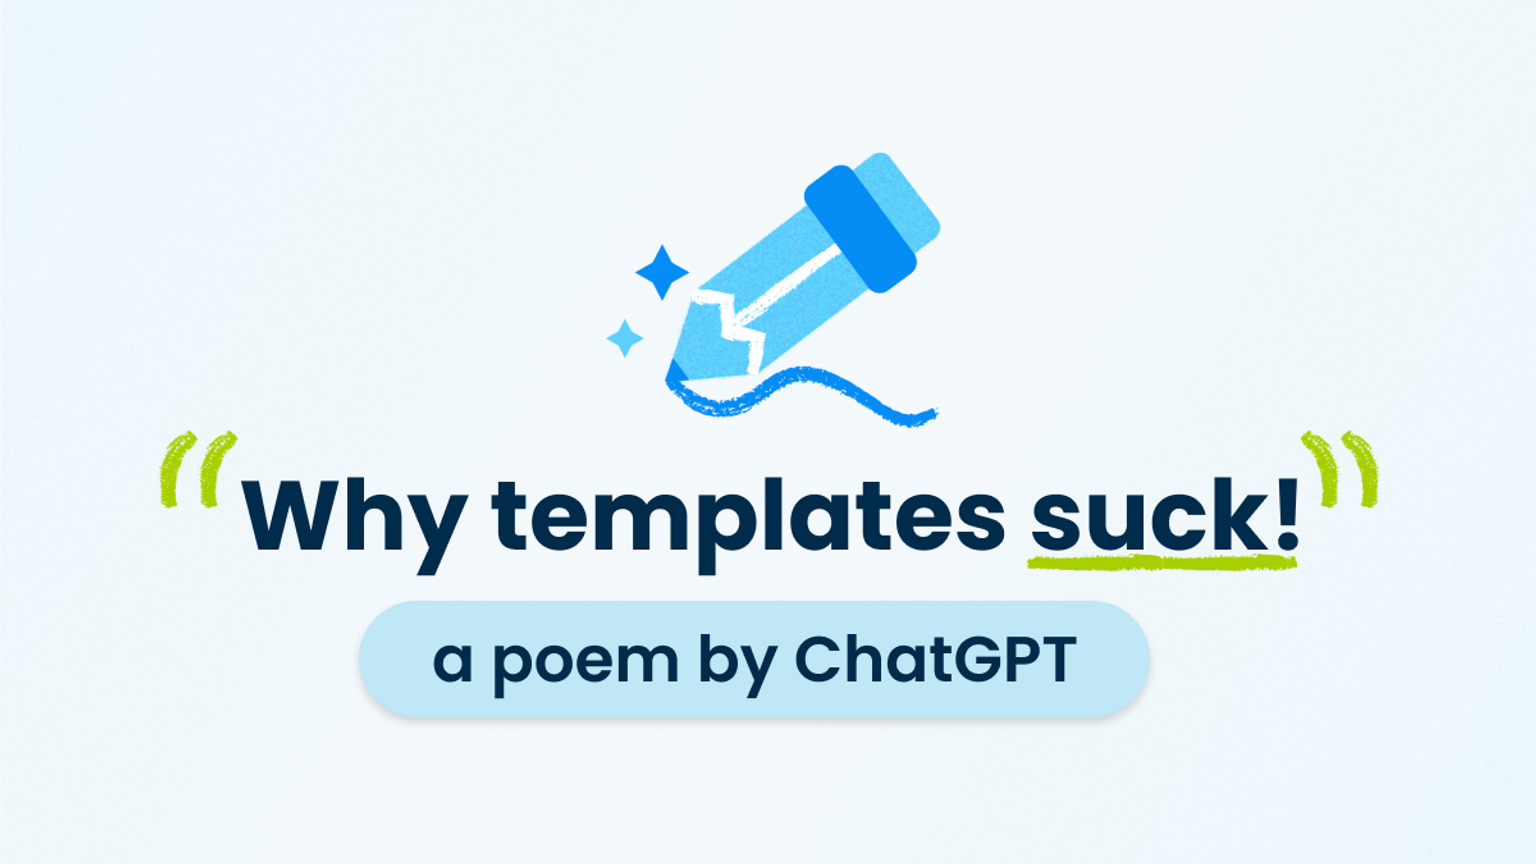 Why Templates Suck - A Poem by ChatGPT